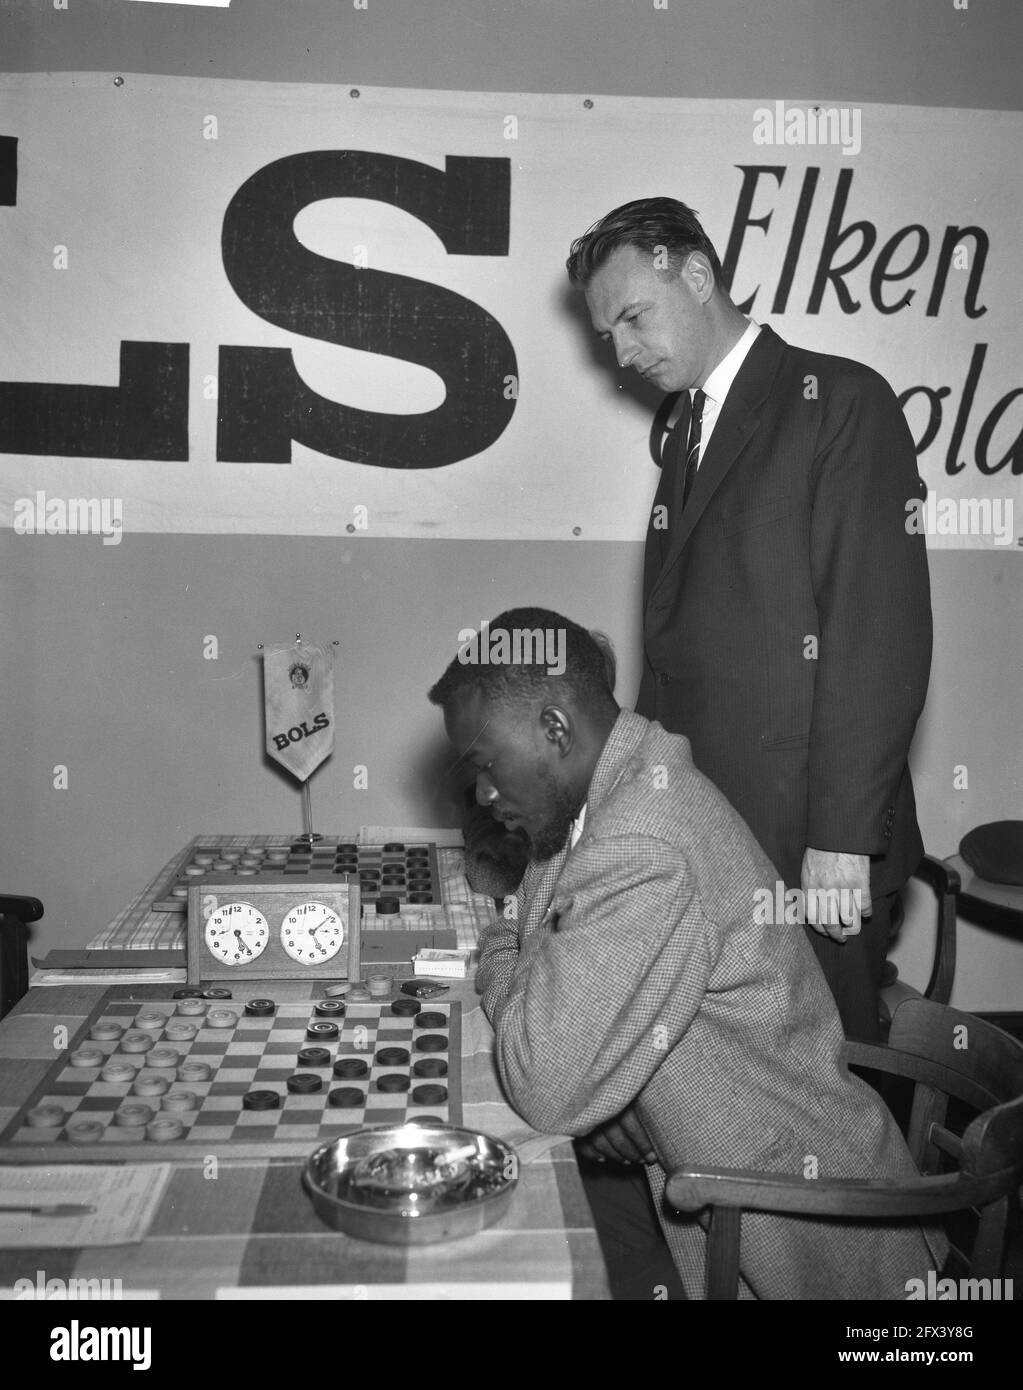 Third International Tournament of Draughts in Krasnapolski. Baby Sy from Senegal. Van Dijk looks on, January 1, 1962, checkers, sports, The Netherlands, 20th century press agency photo, news to remember, documentary, historic photography 1945-1990, visual stories, human history of the Twentieth Century, capturing moments in time Stock Photo